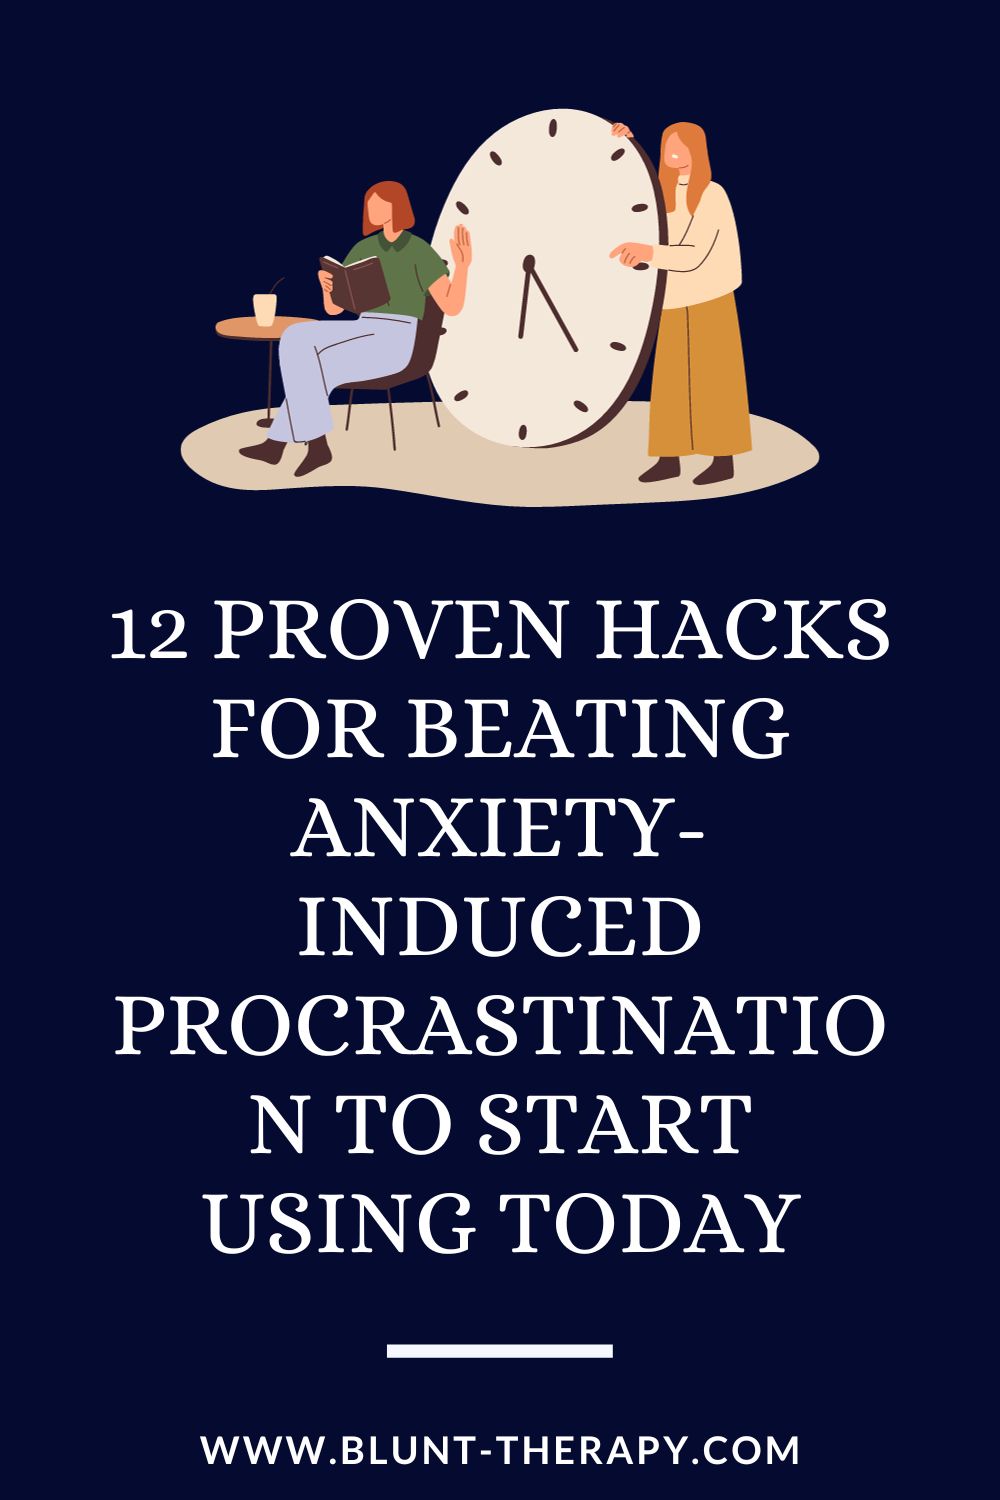 12 Proven Hacks for Beating Anxiety-Induced Procrastination To Start Using Today